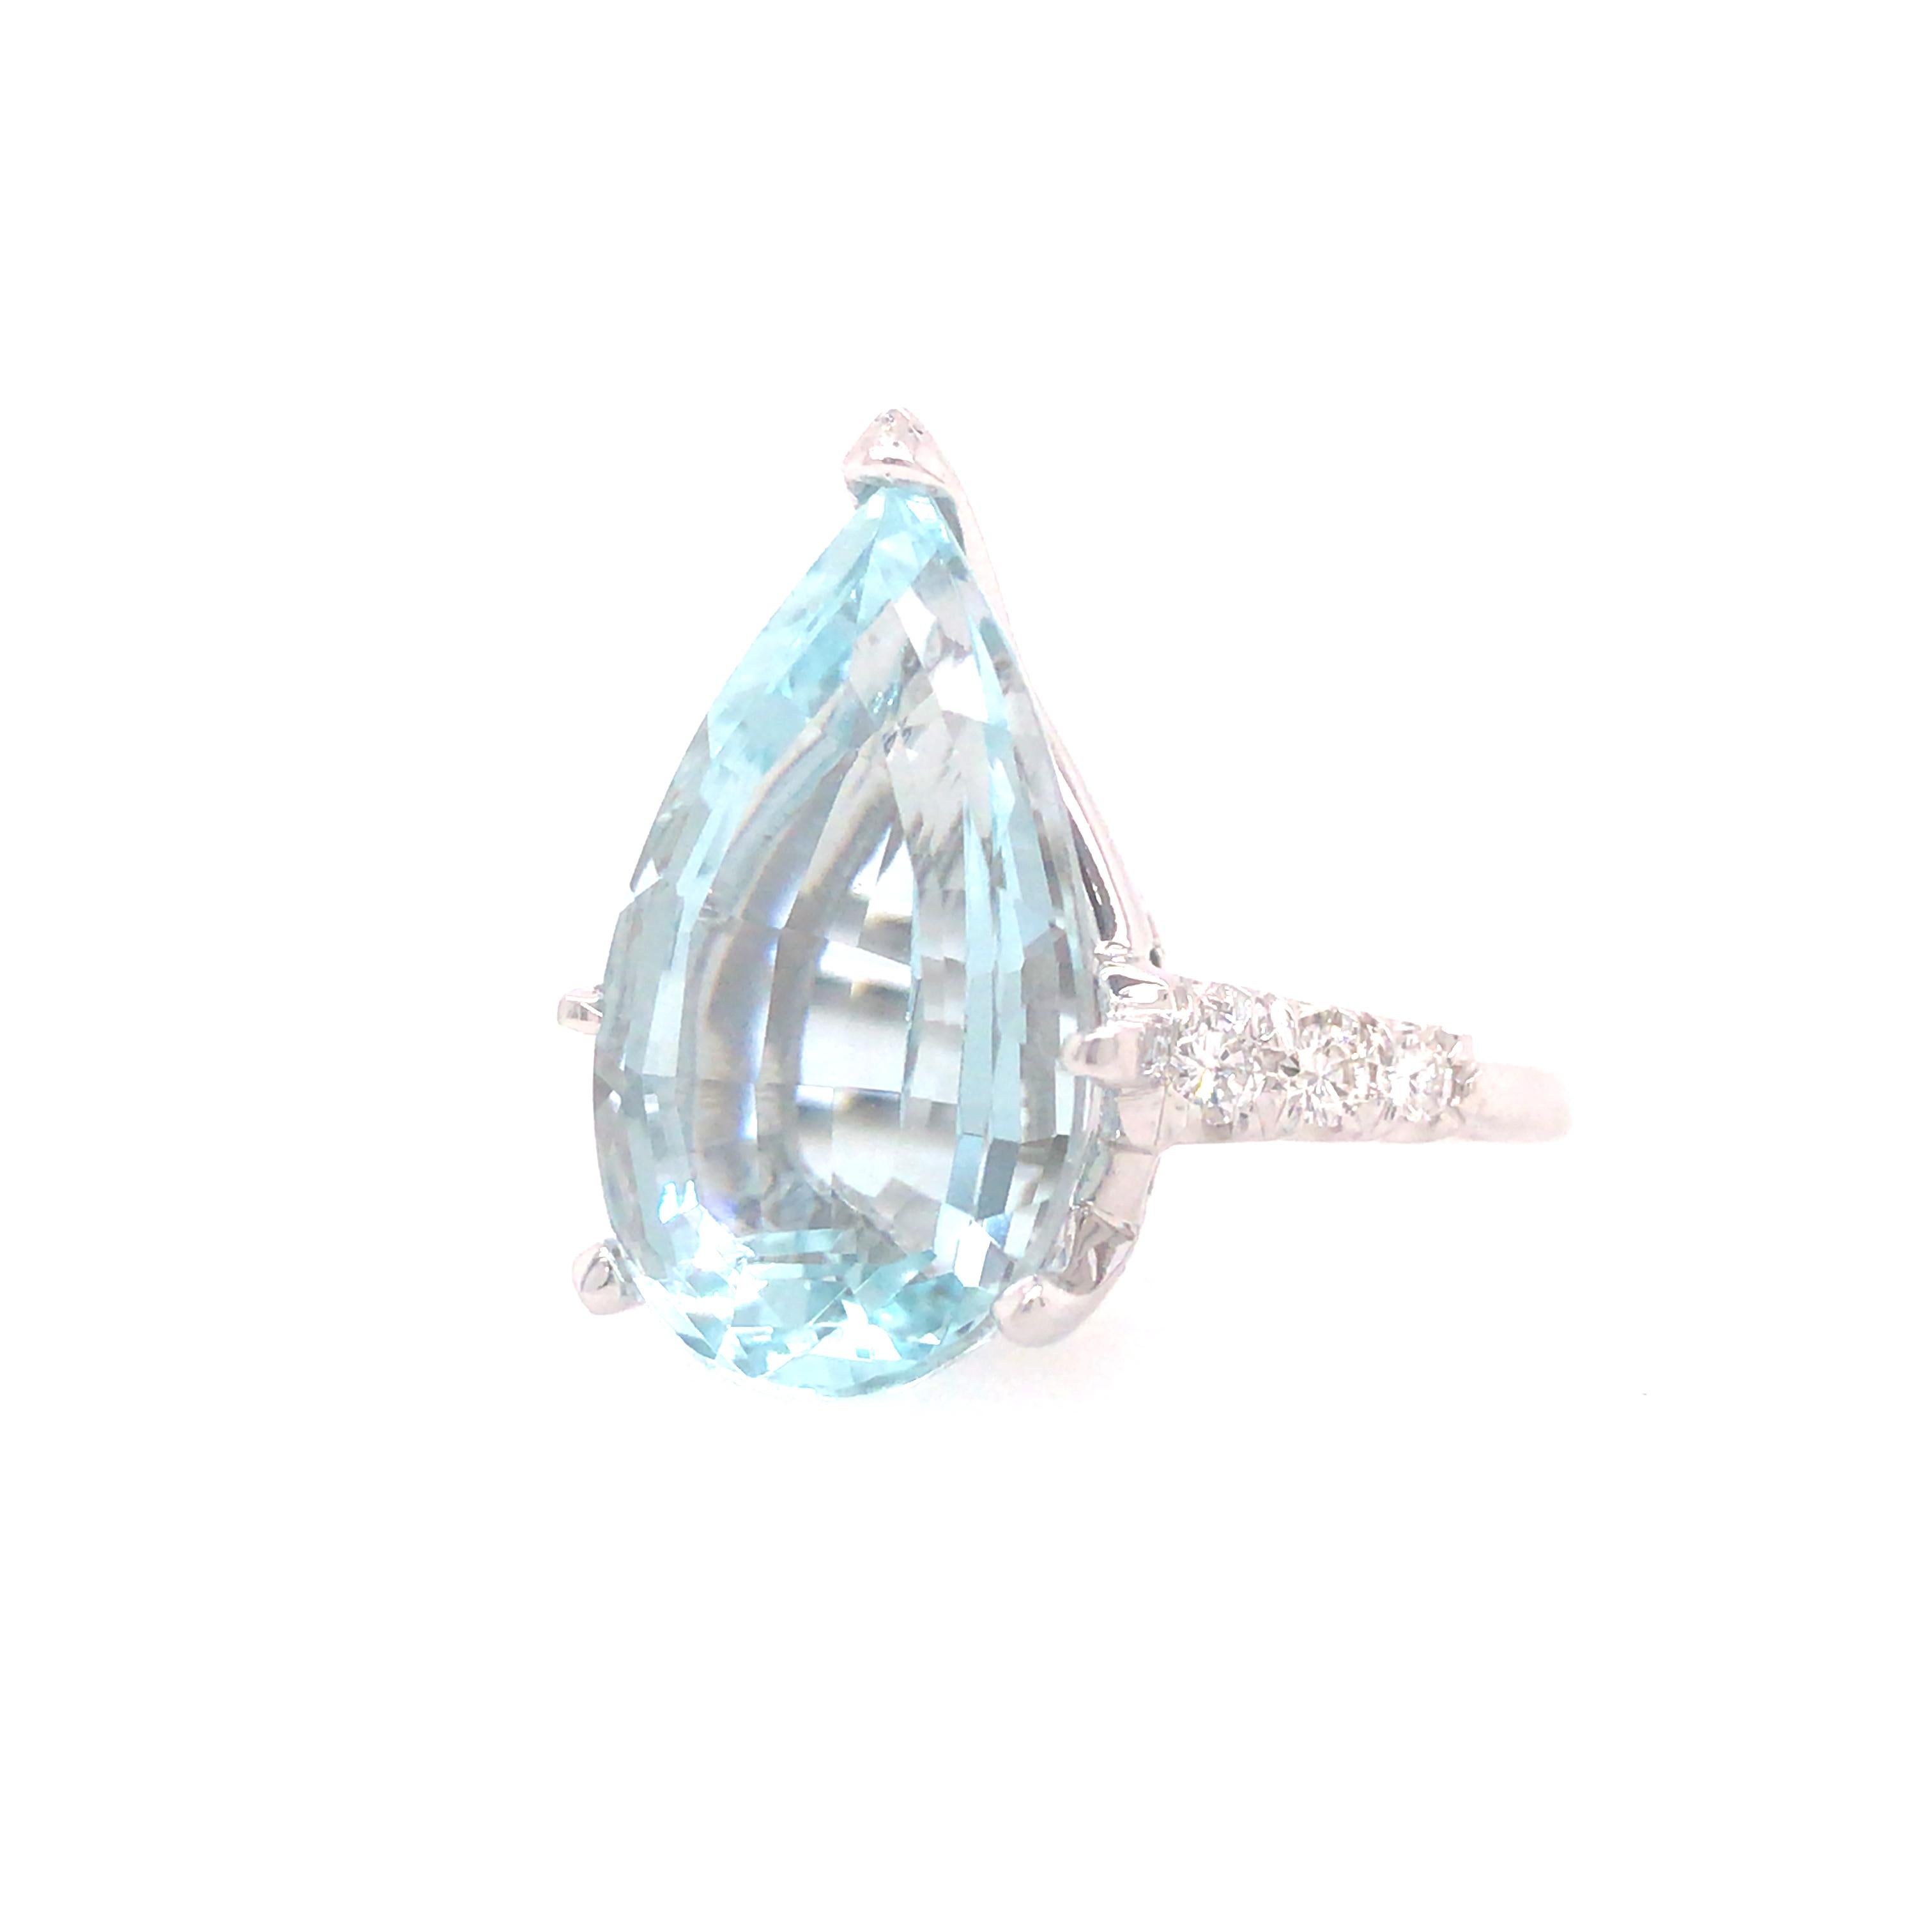 9.50 Carat Pear Shape Aqua Ring with Diamonds in 14K White Gold.  (6) Round Brilliant Cut Diamonds weighing 0.24 carat total weight, G-H in color and VS in clarity are expertly set in the Shank.  Ring size 6. 6.8 grams.